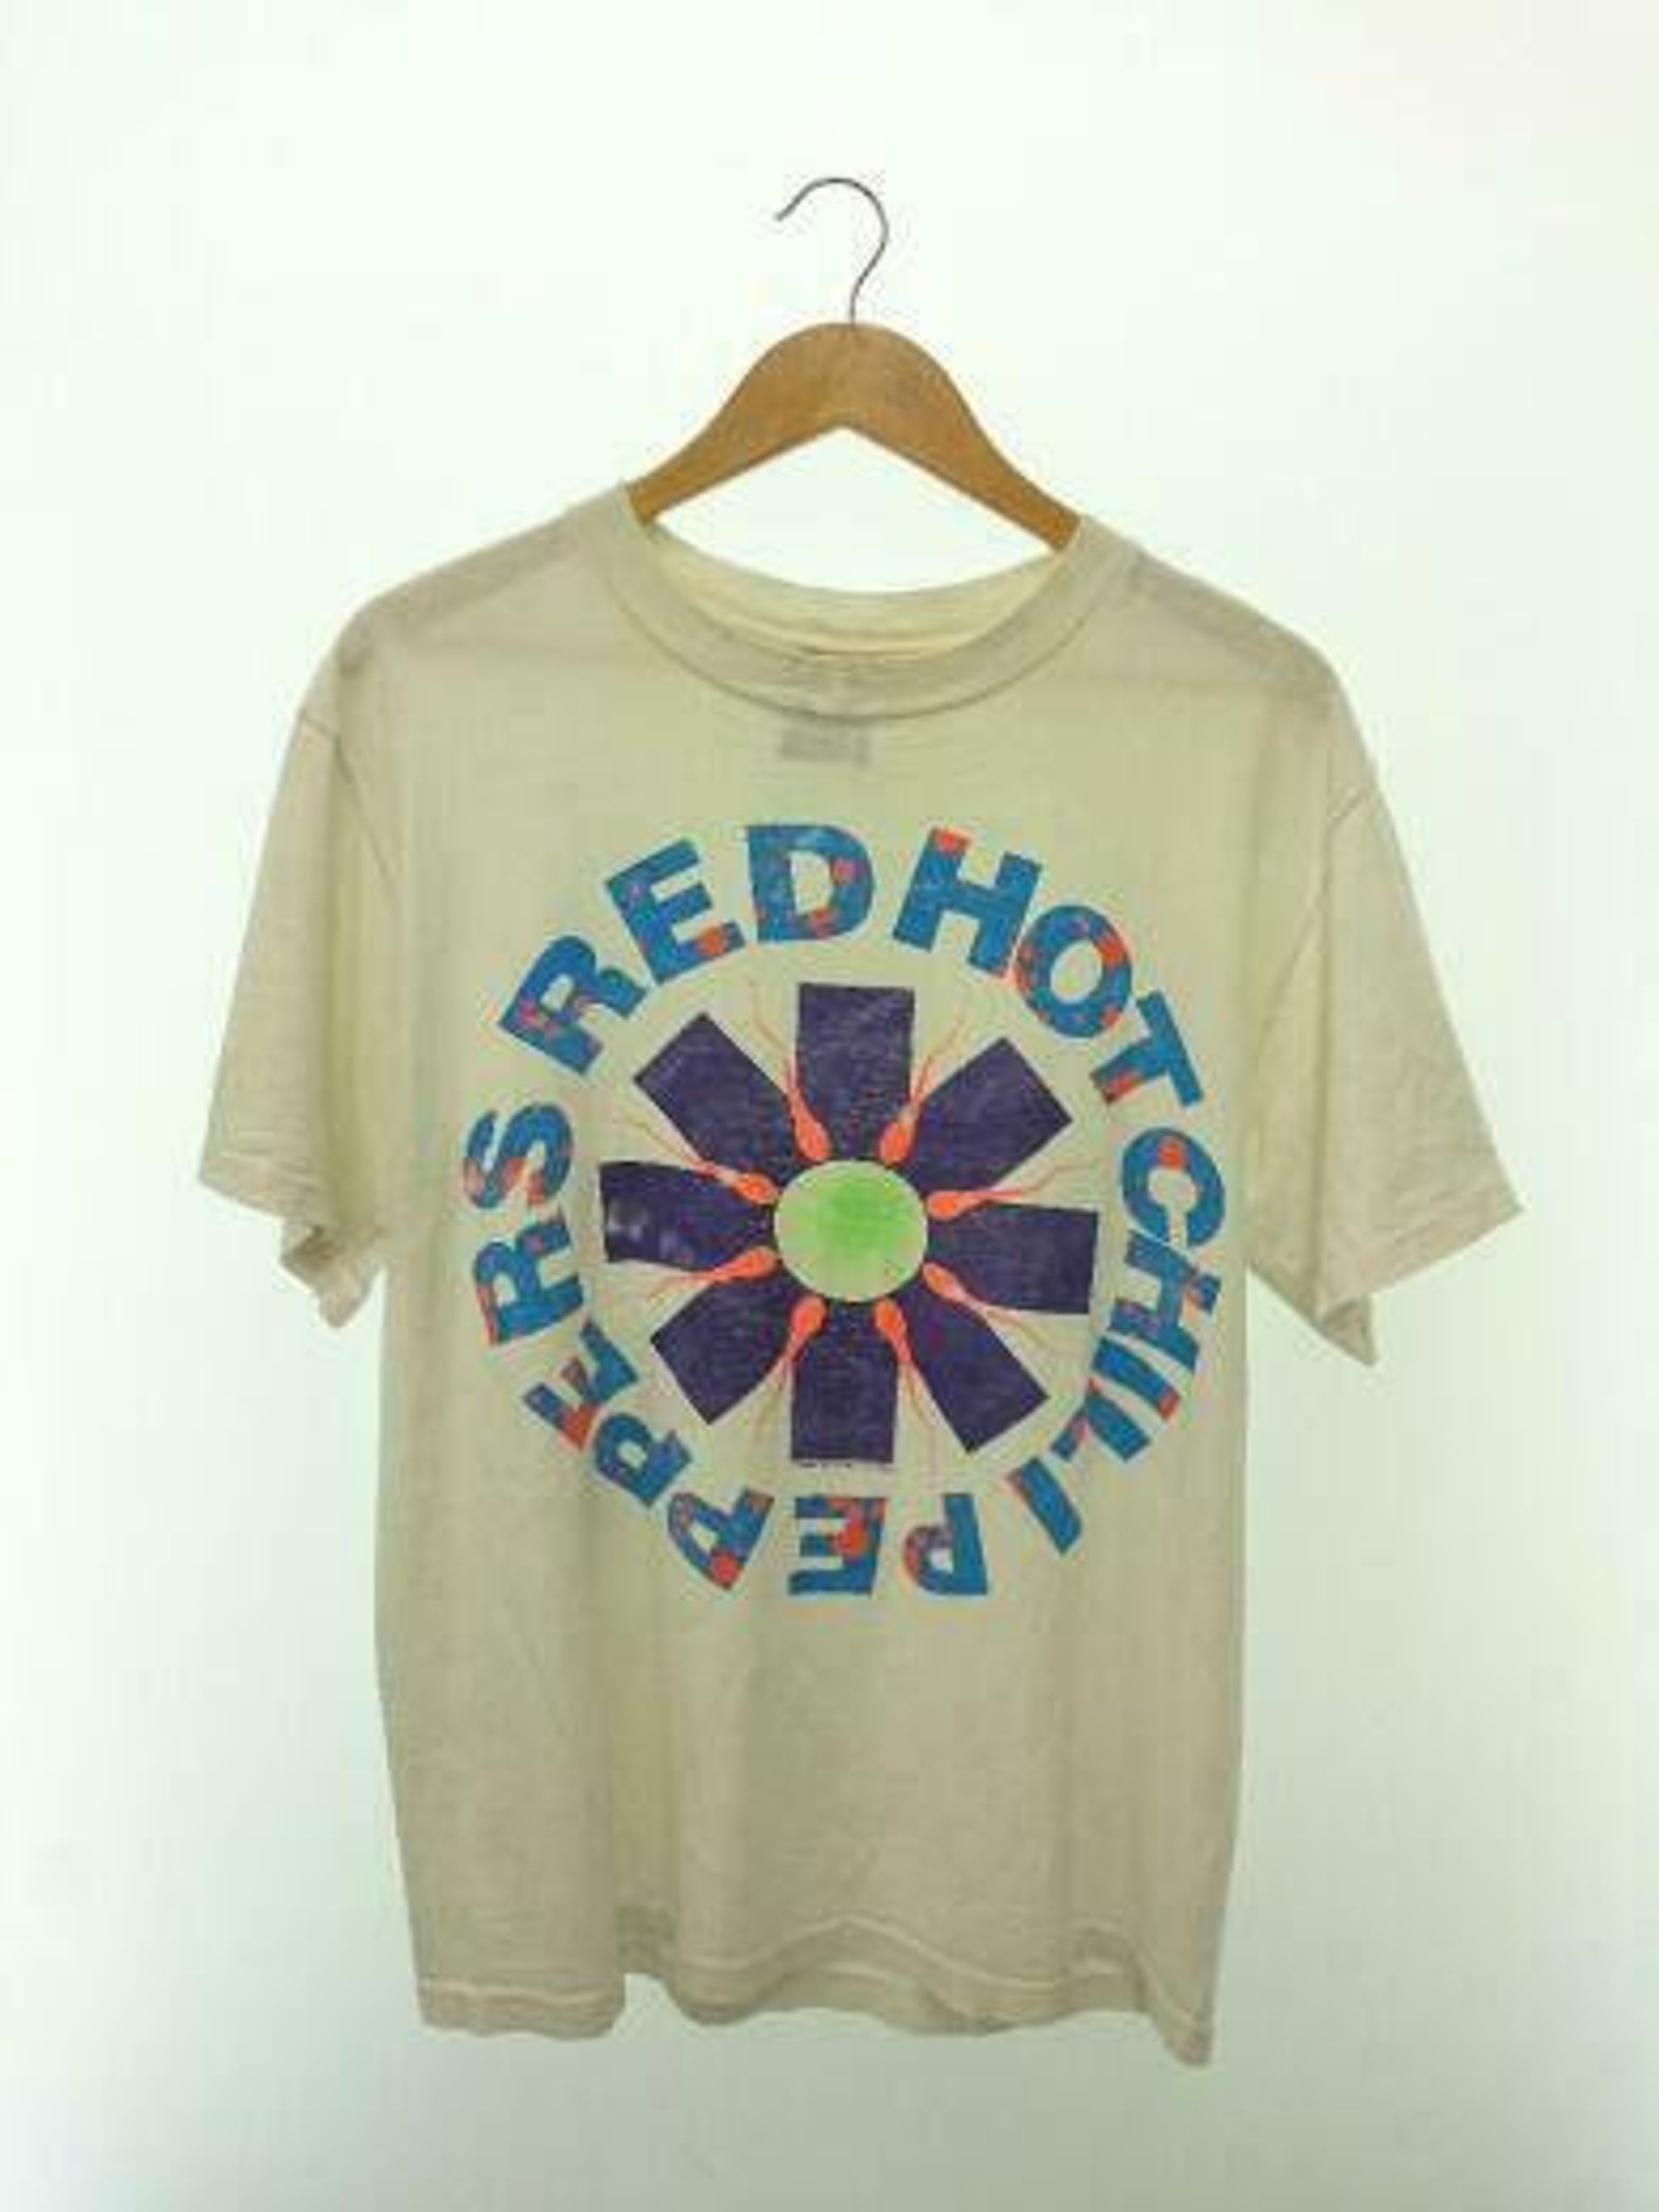 Vintage Red Hot Chili Peppers 1990 Giant Single Stitch Tshirt